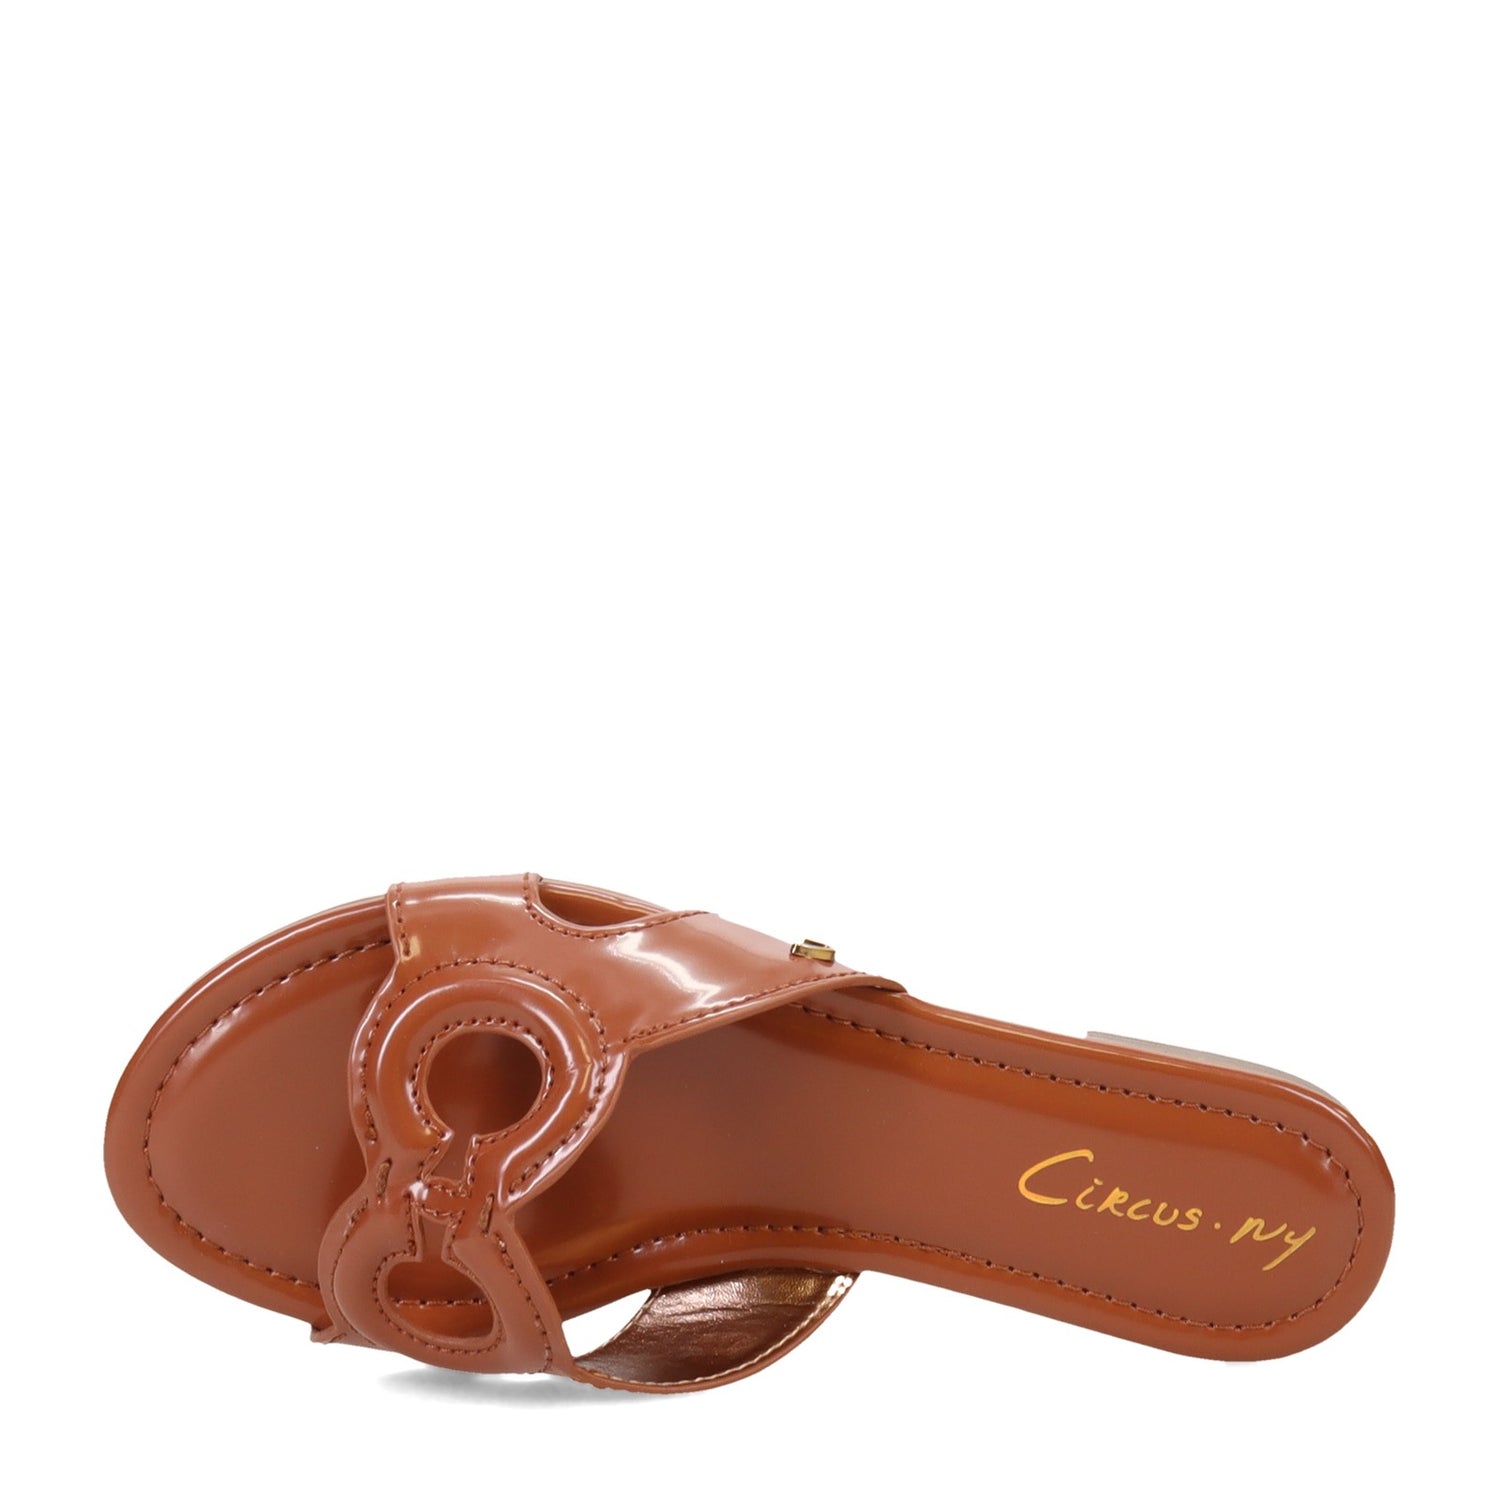 Peltz Shoes  Women's Circus NY Cate Sandal BROWN I6133S3200